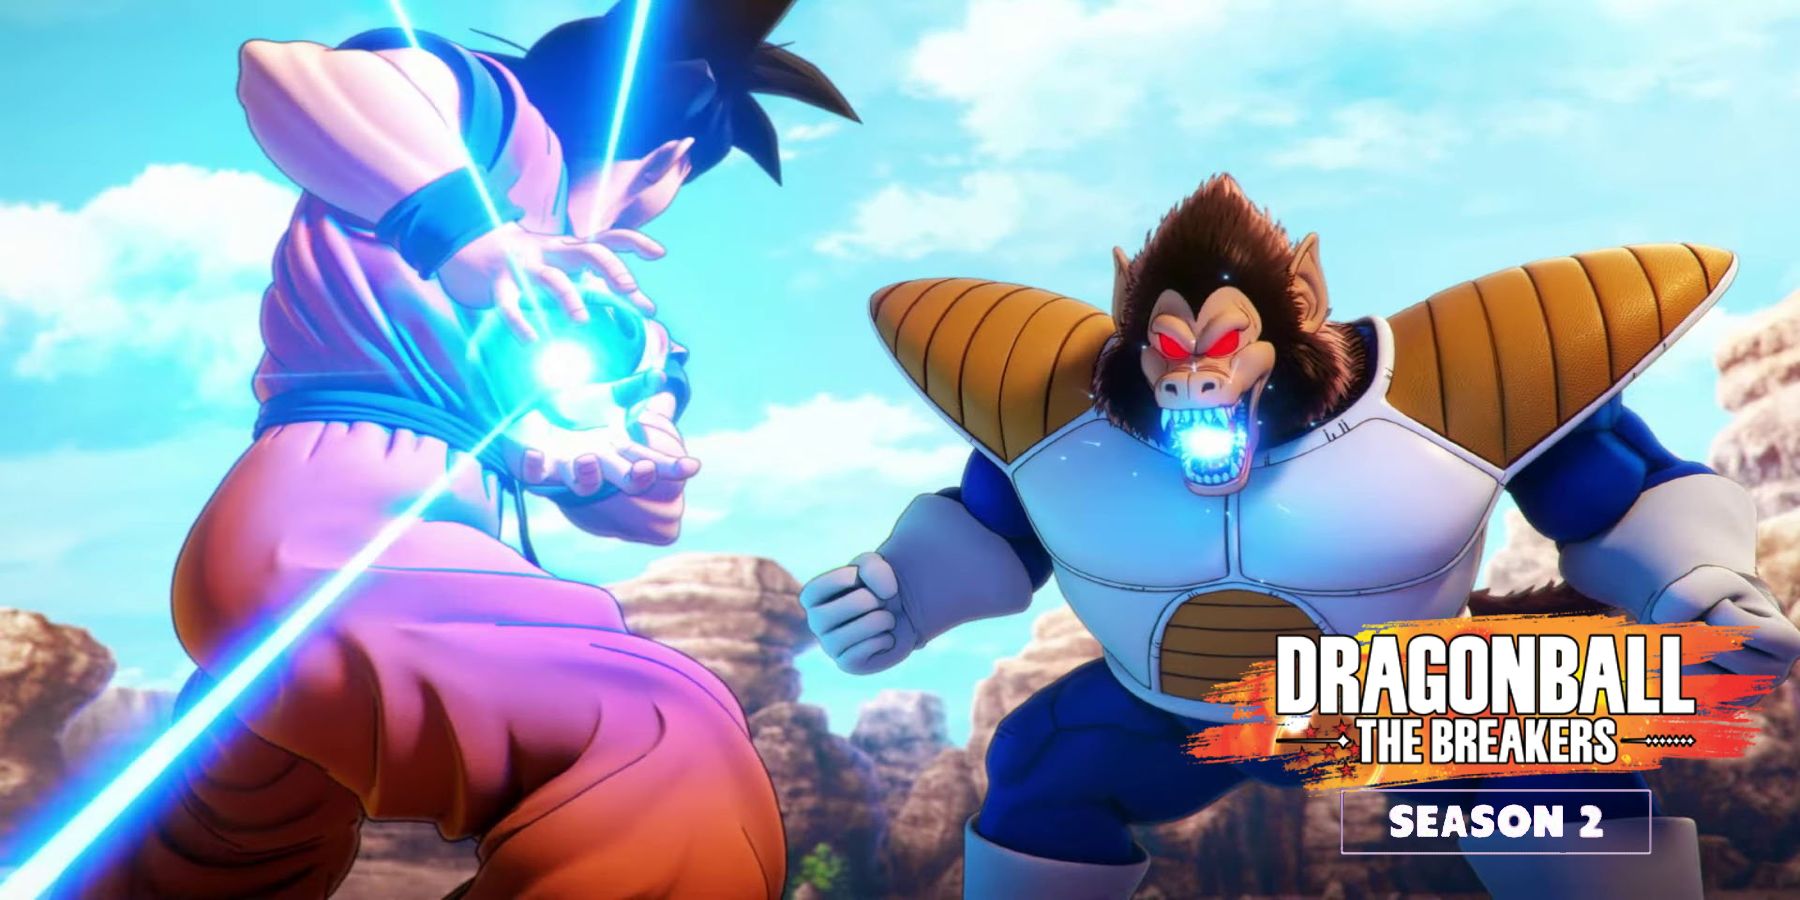 About Issues Occurring on DRAGON BALL: THE BREAKERS